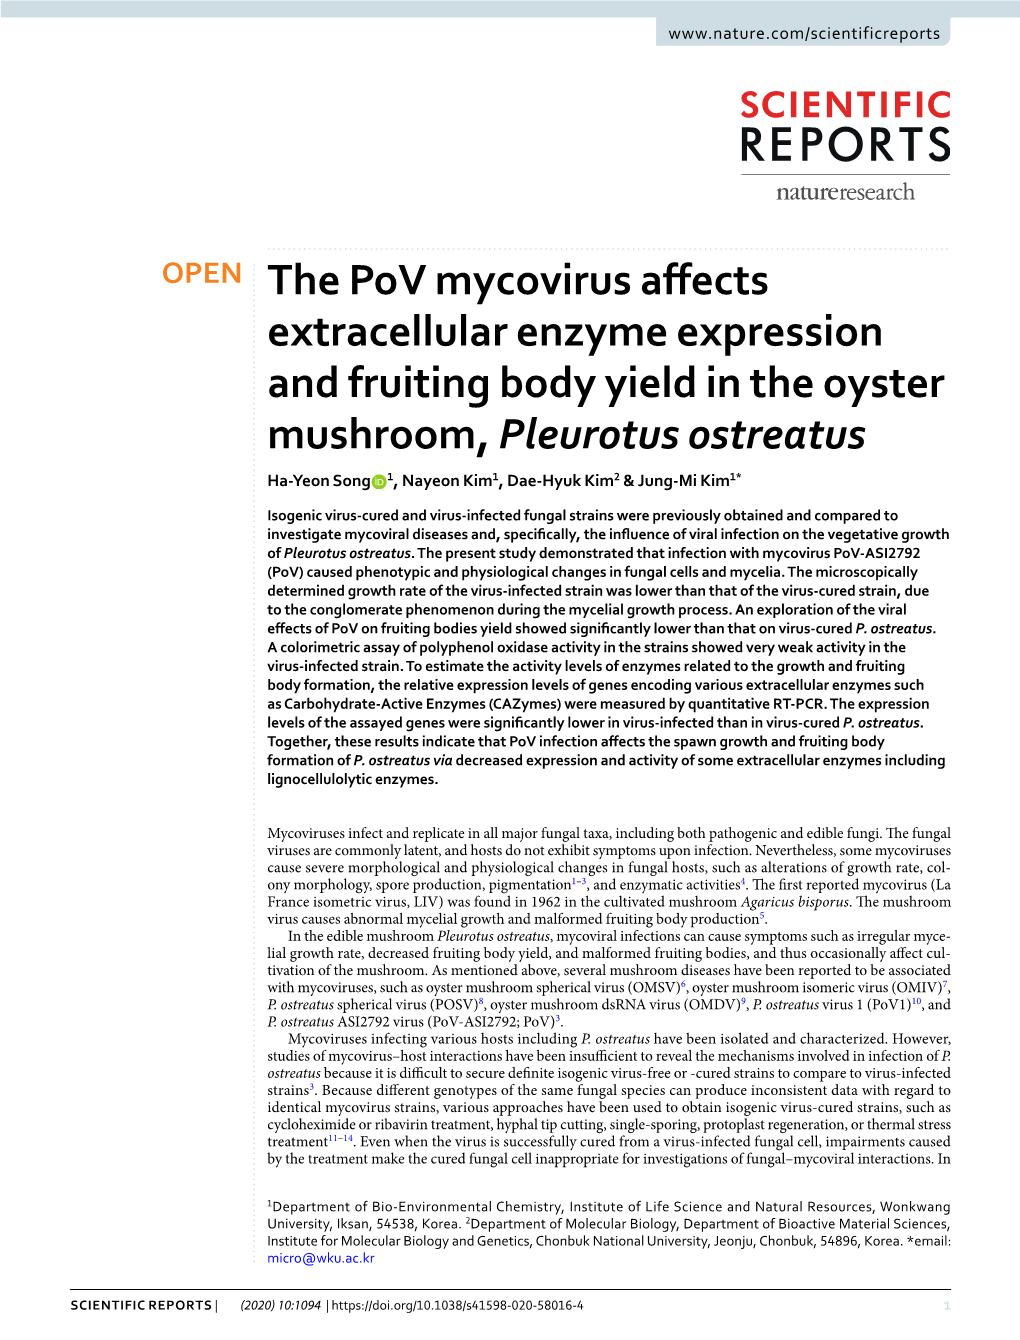 The Pov Mycovirus Affects Extracellular Enzyme Expression